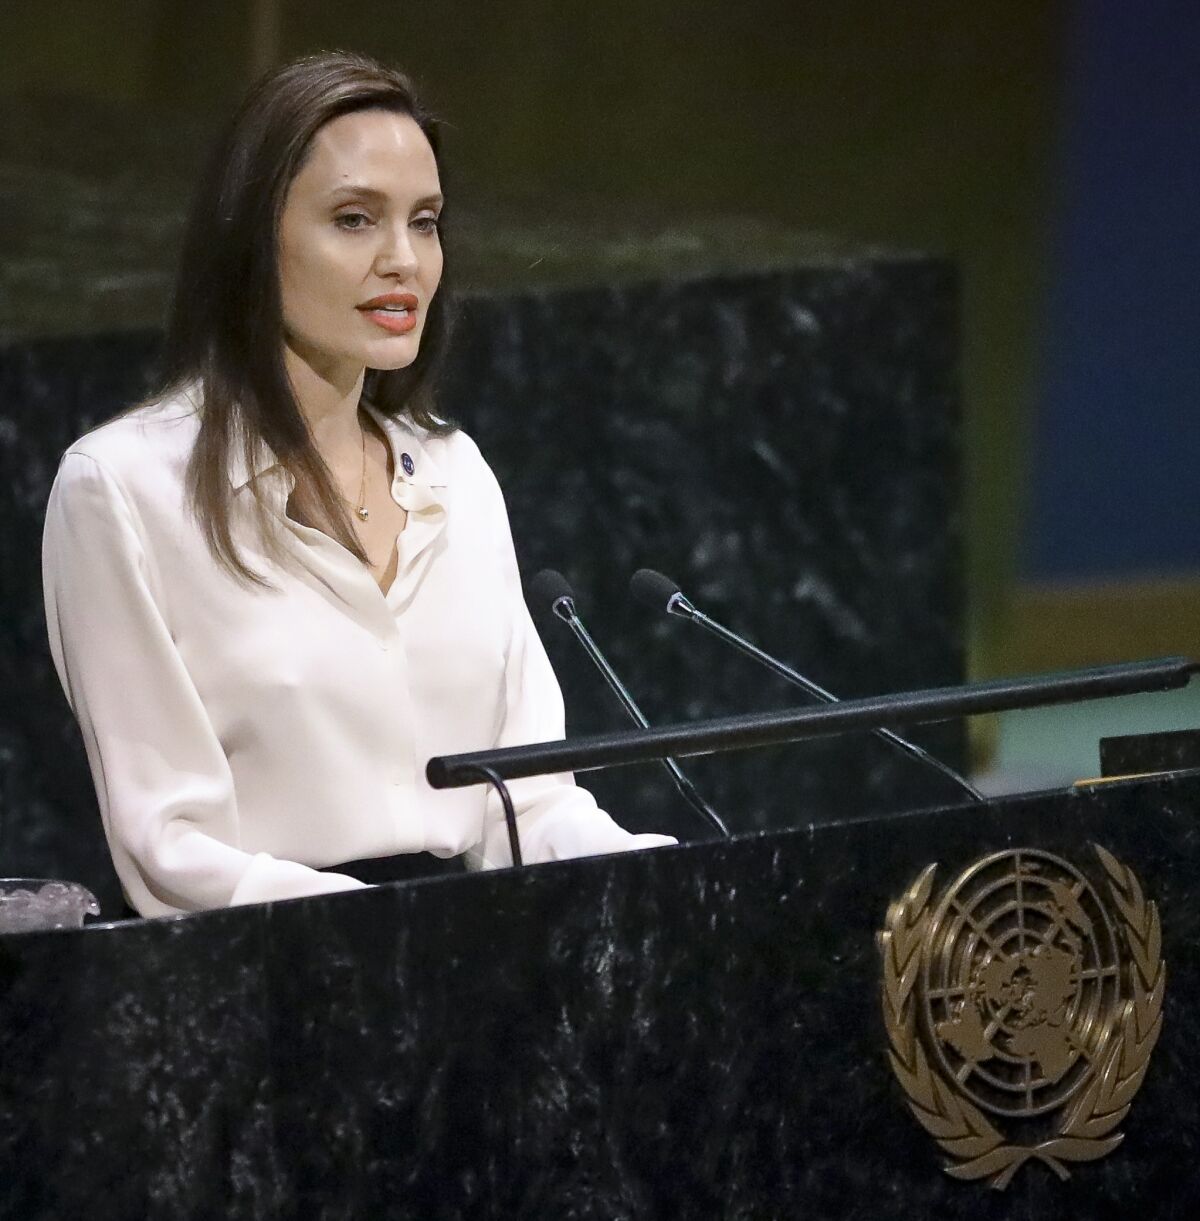 Angelina Jolie in a white blouse speaks into a microphone while behind a United Nations podium